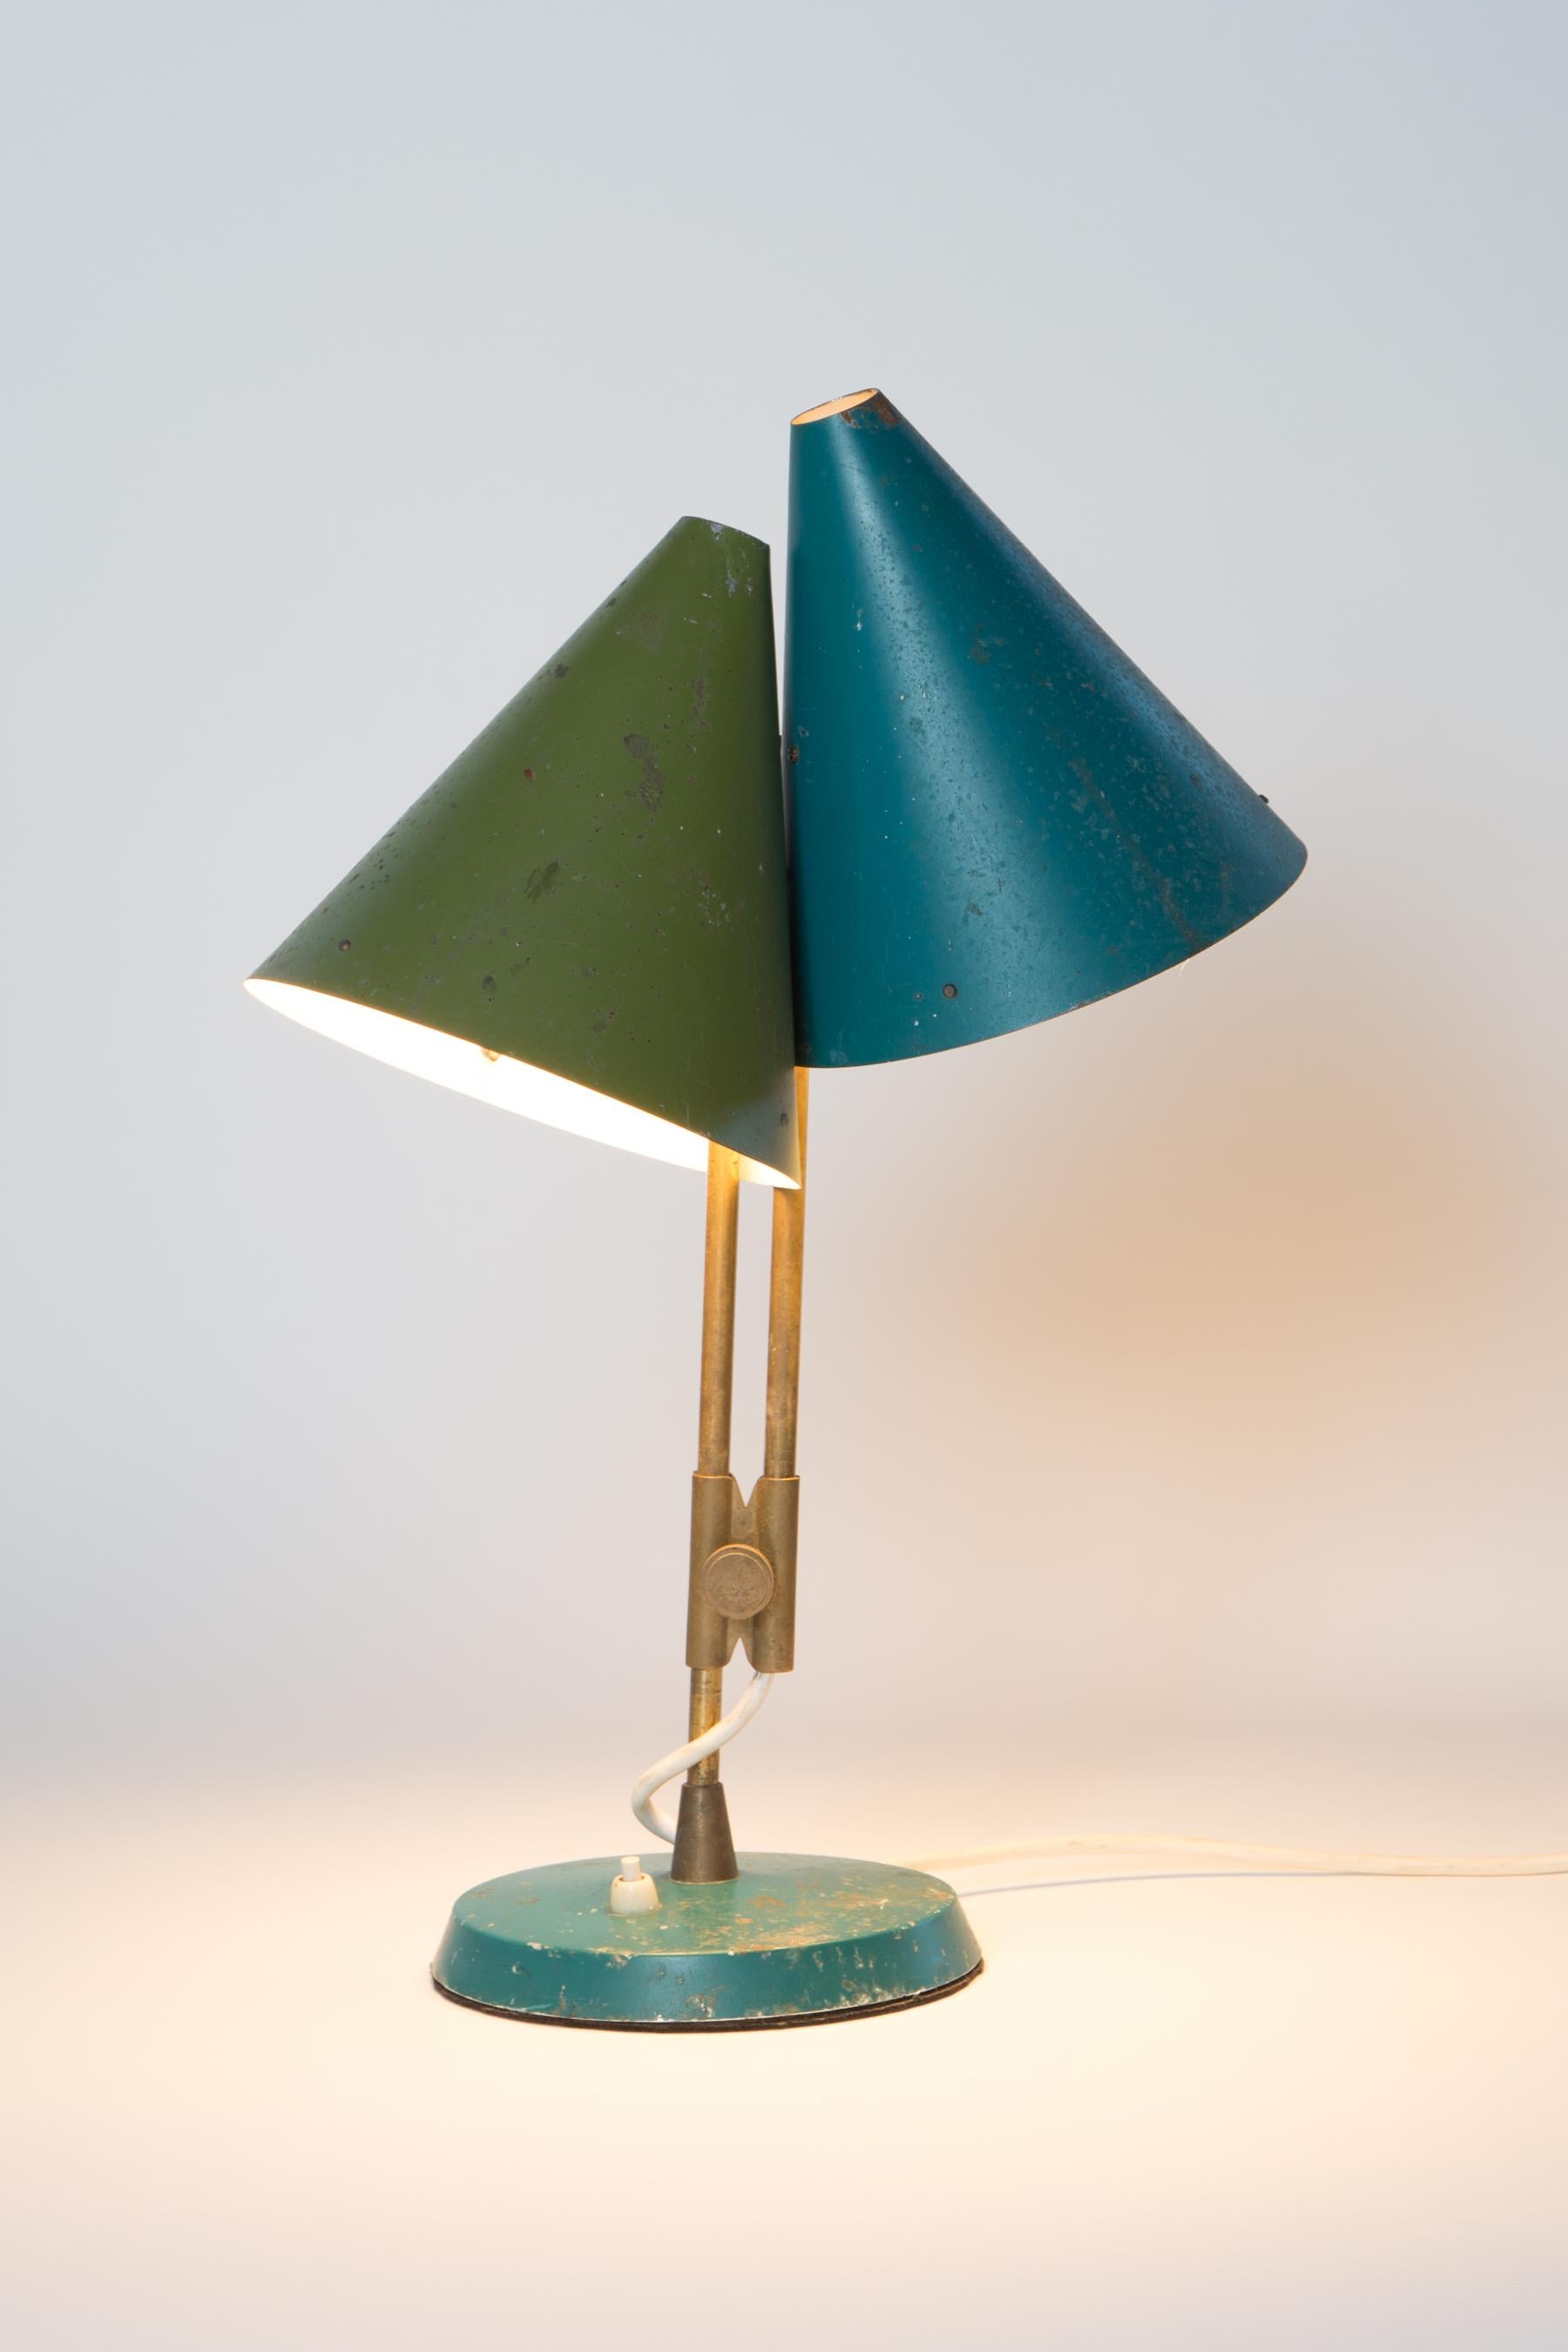 1959 Bent Karlby 'Mosaik' Adjustable Brass & Lacquered Metal Table Lamp for Lyfa 9